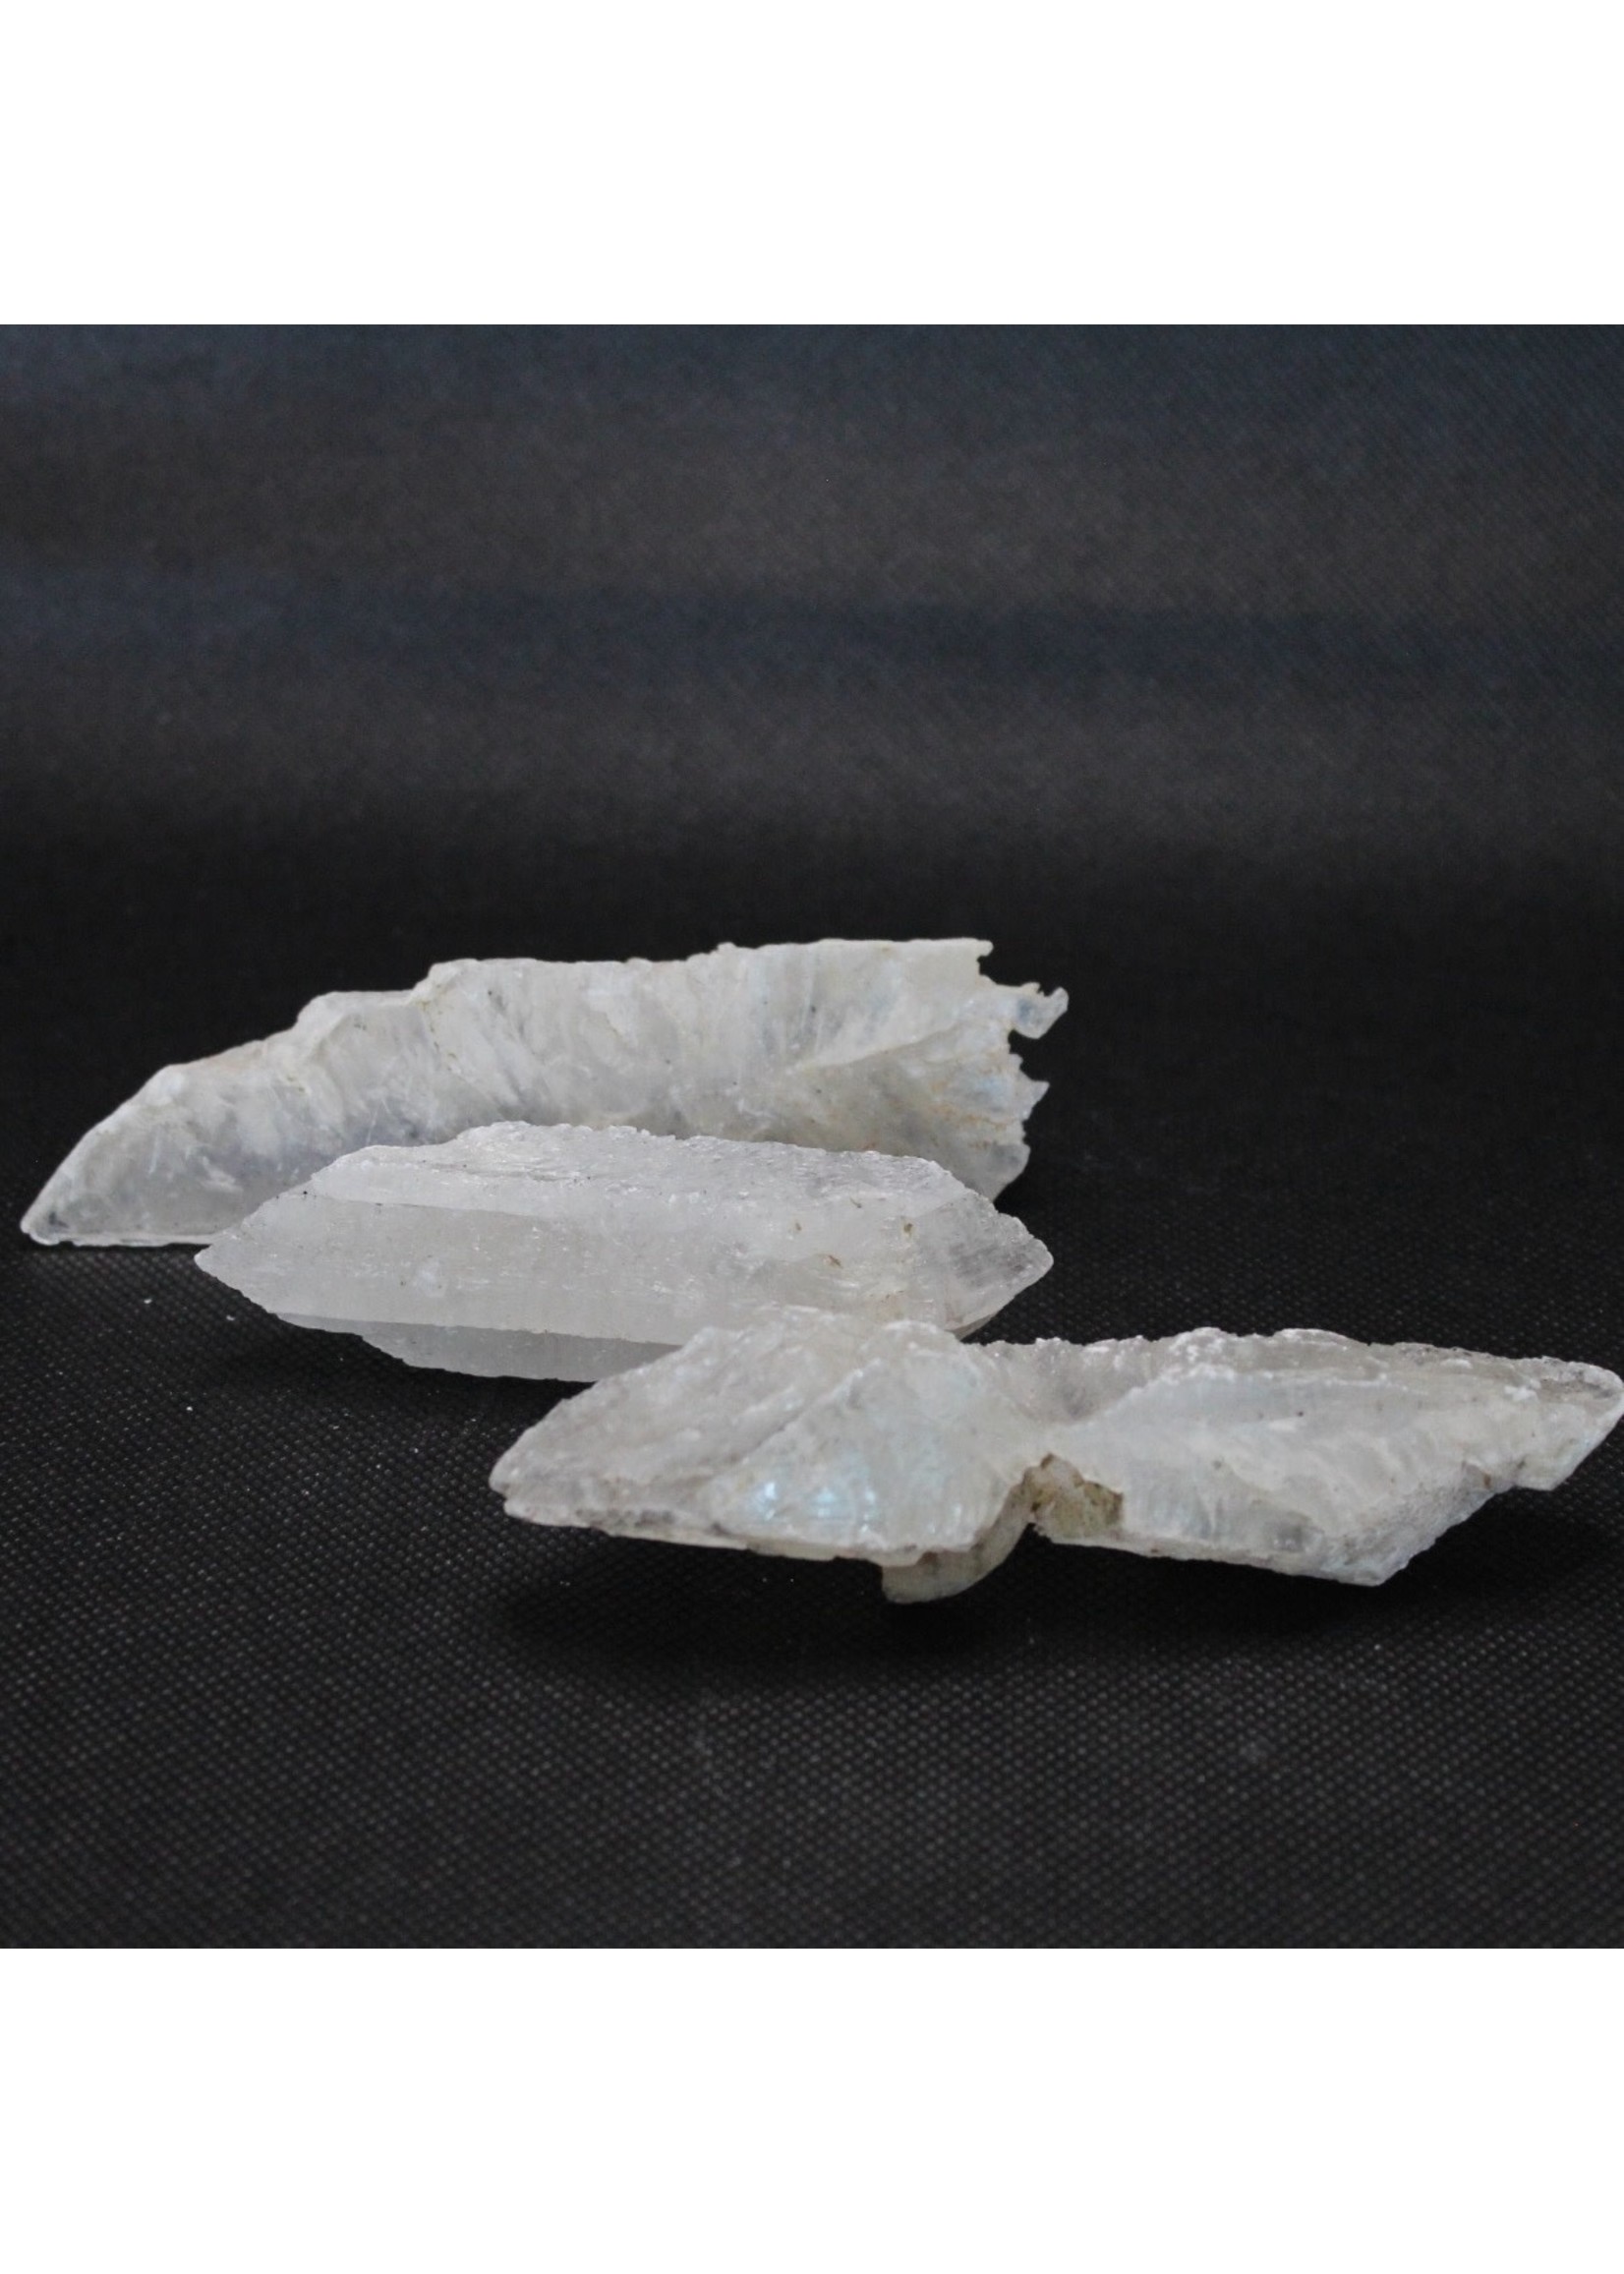 Angel Feather Selenite Natural Double Terminated Wands